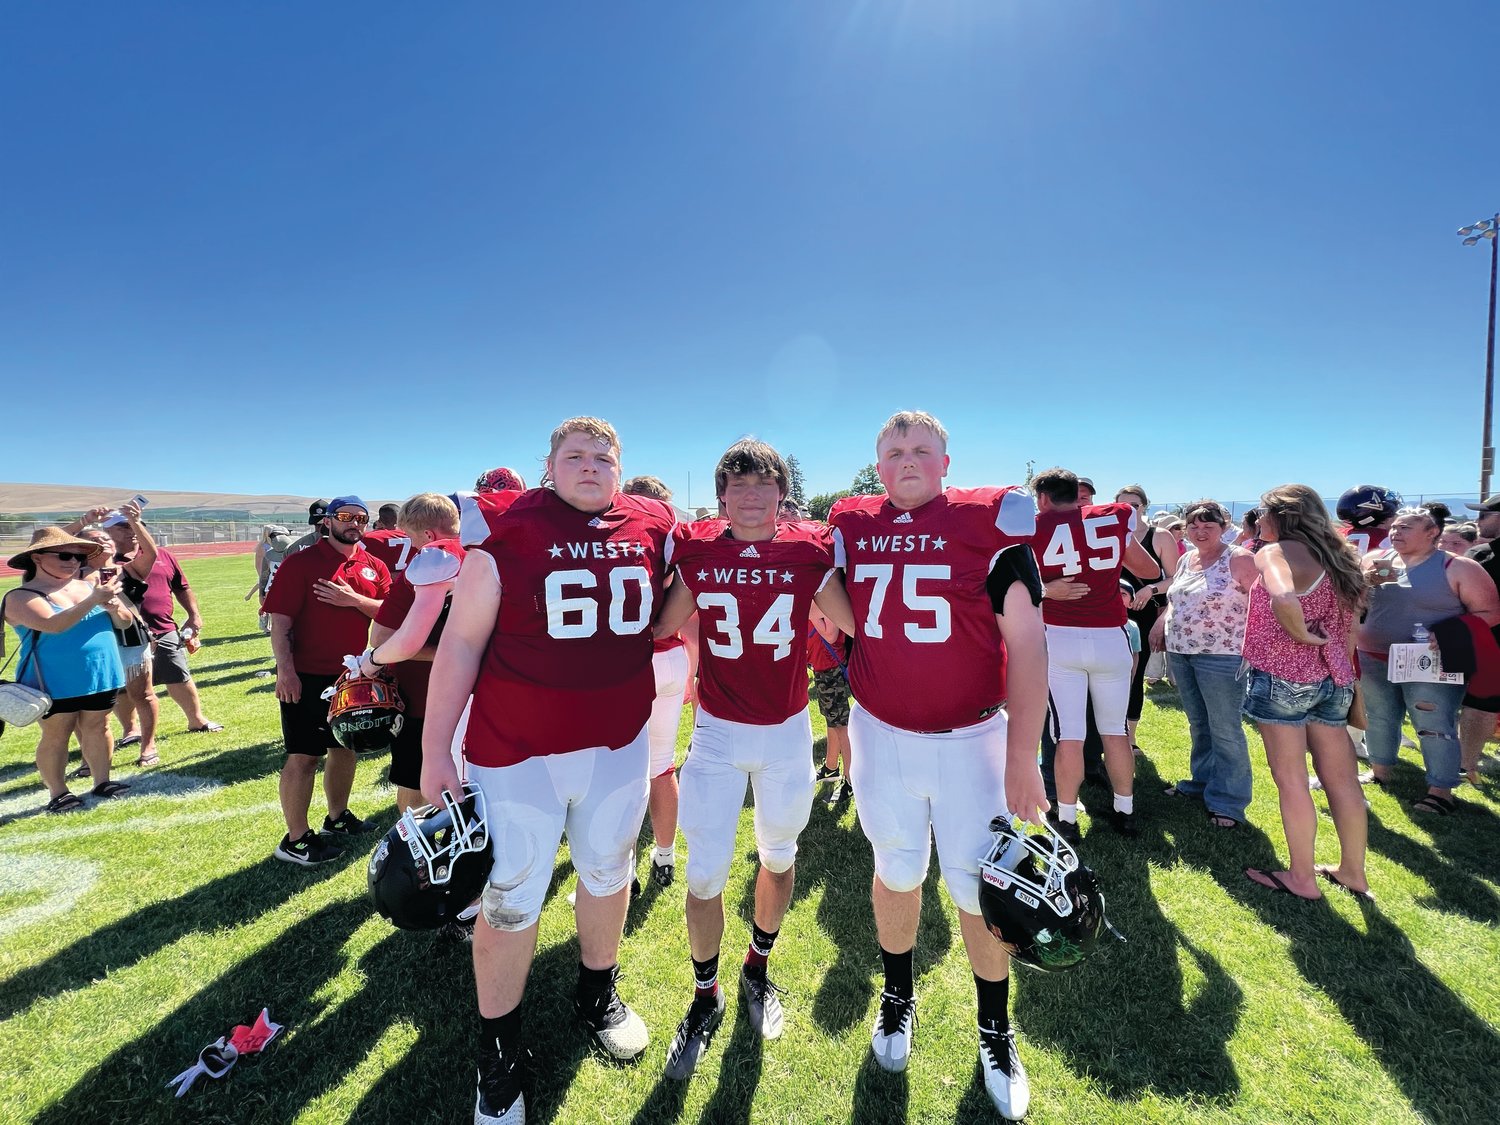 Rivals seniors Chris Fair, Logan Massie, and Marshall Graves pose together after the Earl Barden Classic all-star football game in Yakima this past weekend.